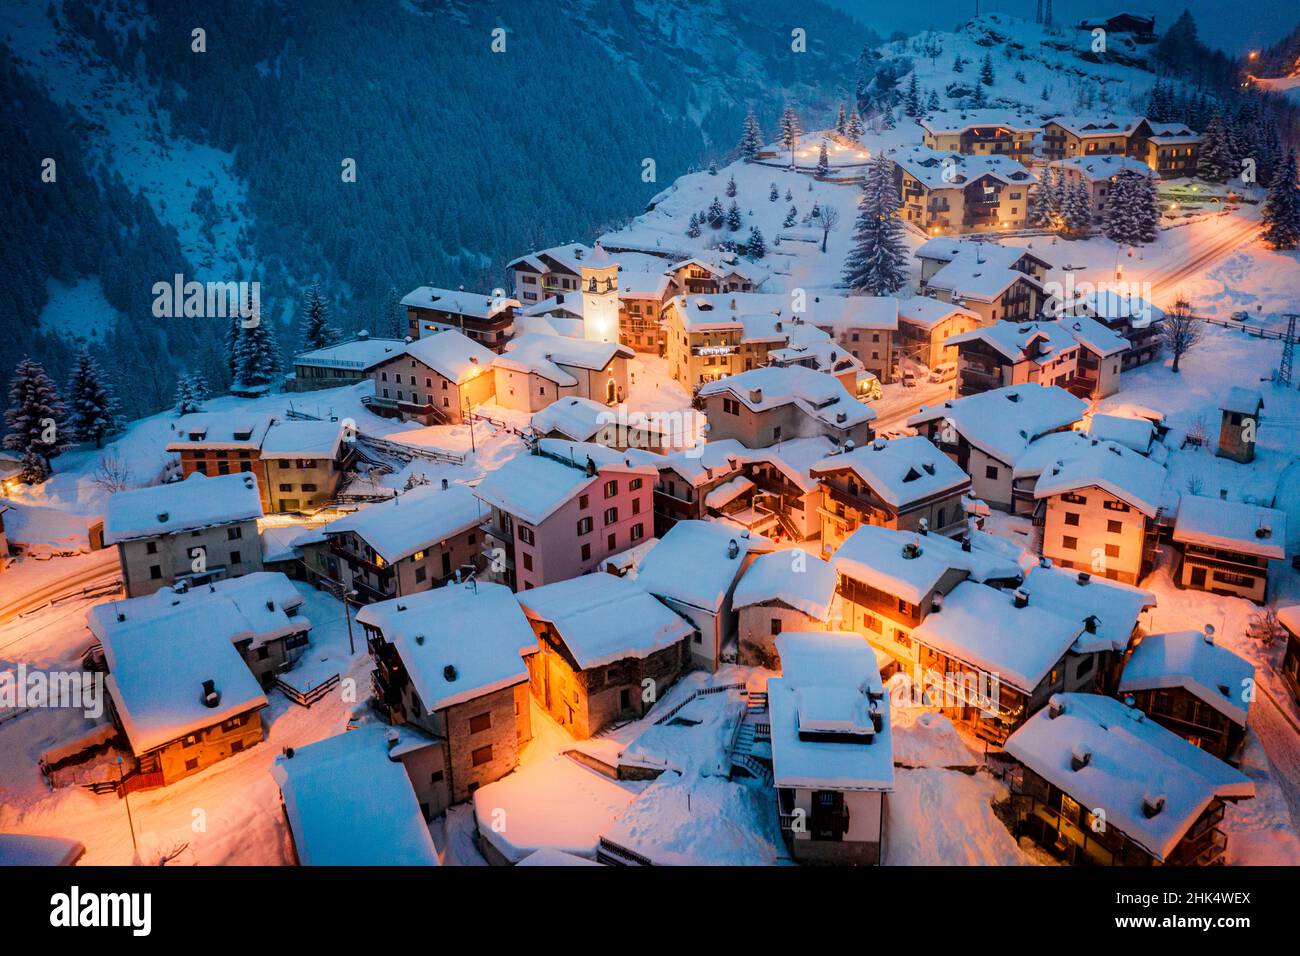 Christmas lights on mountain houses and chalets covered with snow at dusk, Pianazzo, Madesimo, Valle Spluga, Valtellina, Lombardy, Italy, Europe Stock Photo